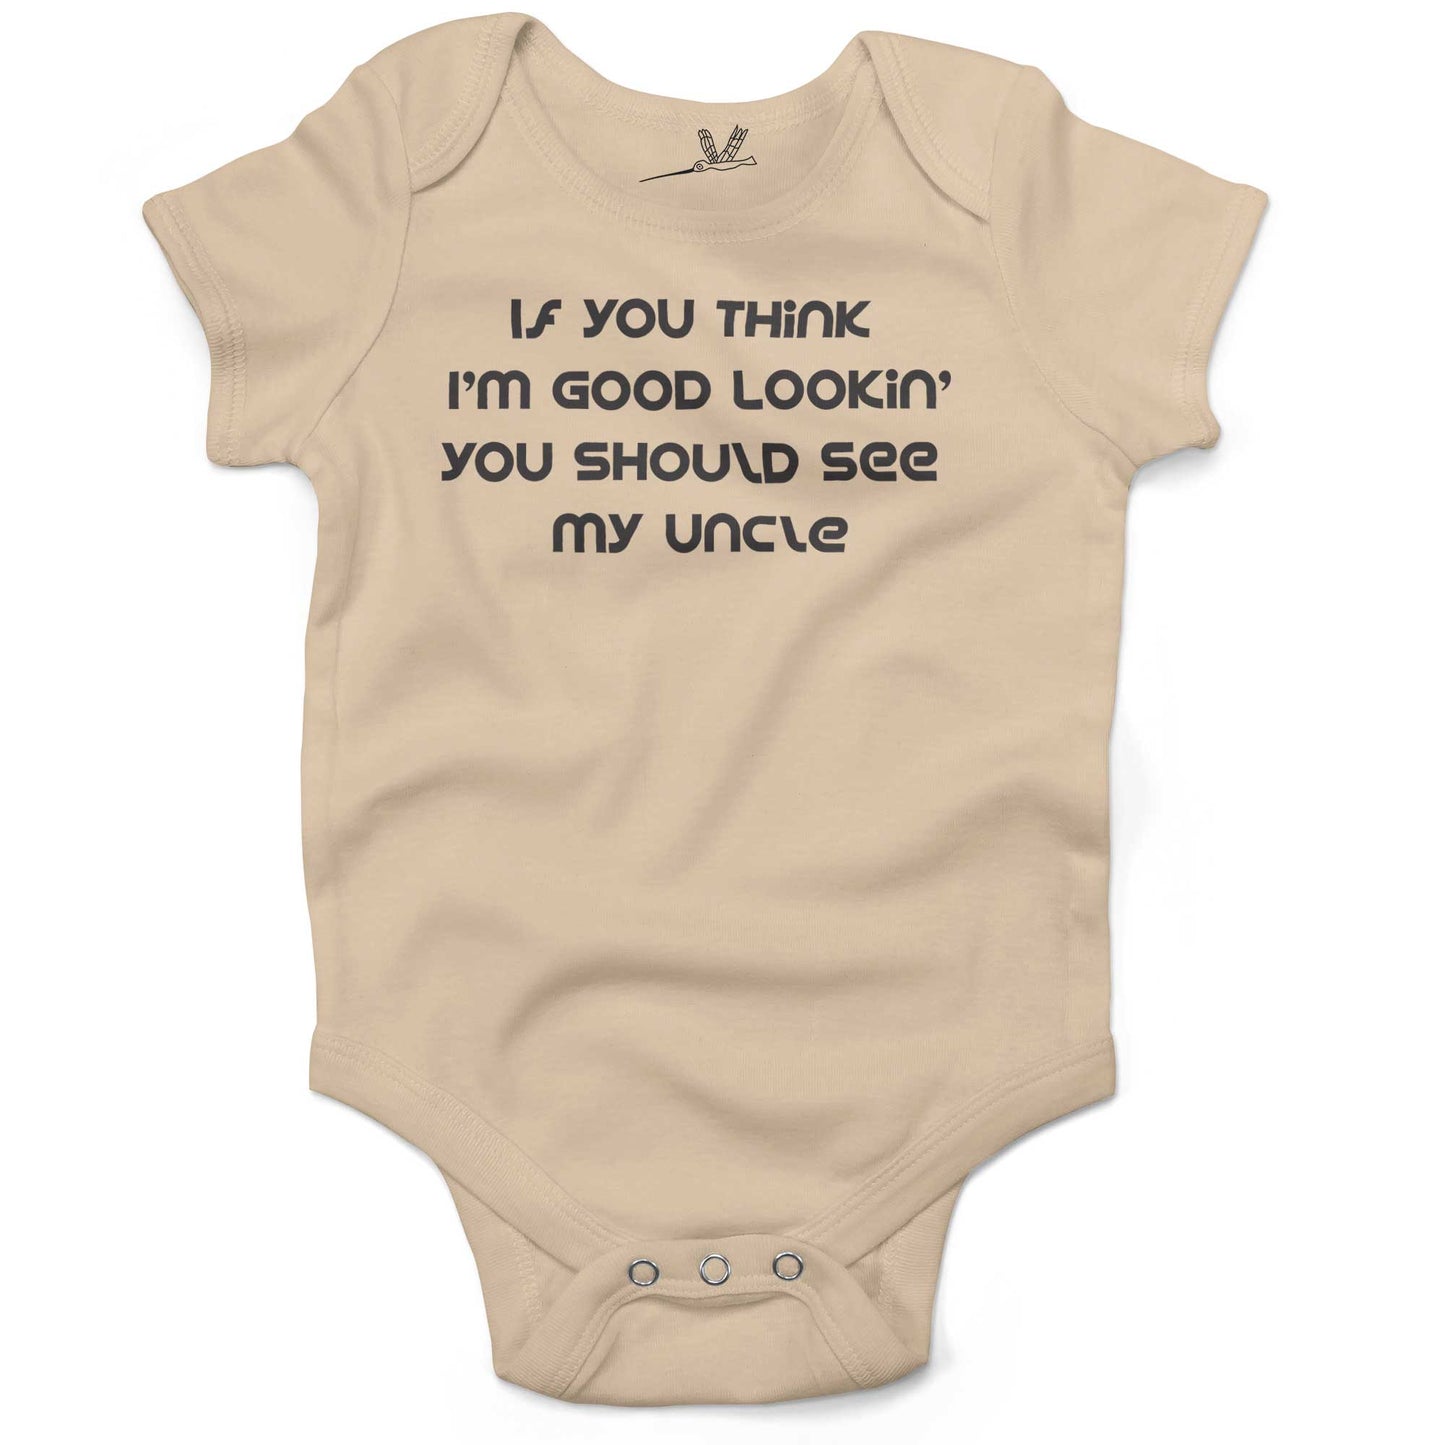 If You Think I'm Good Lookin' You Should See My Uncle Infant Bodysuit or Raglan Tee-Organic Natural-3-6 months